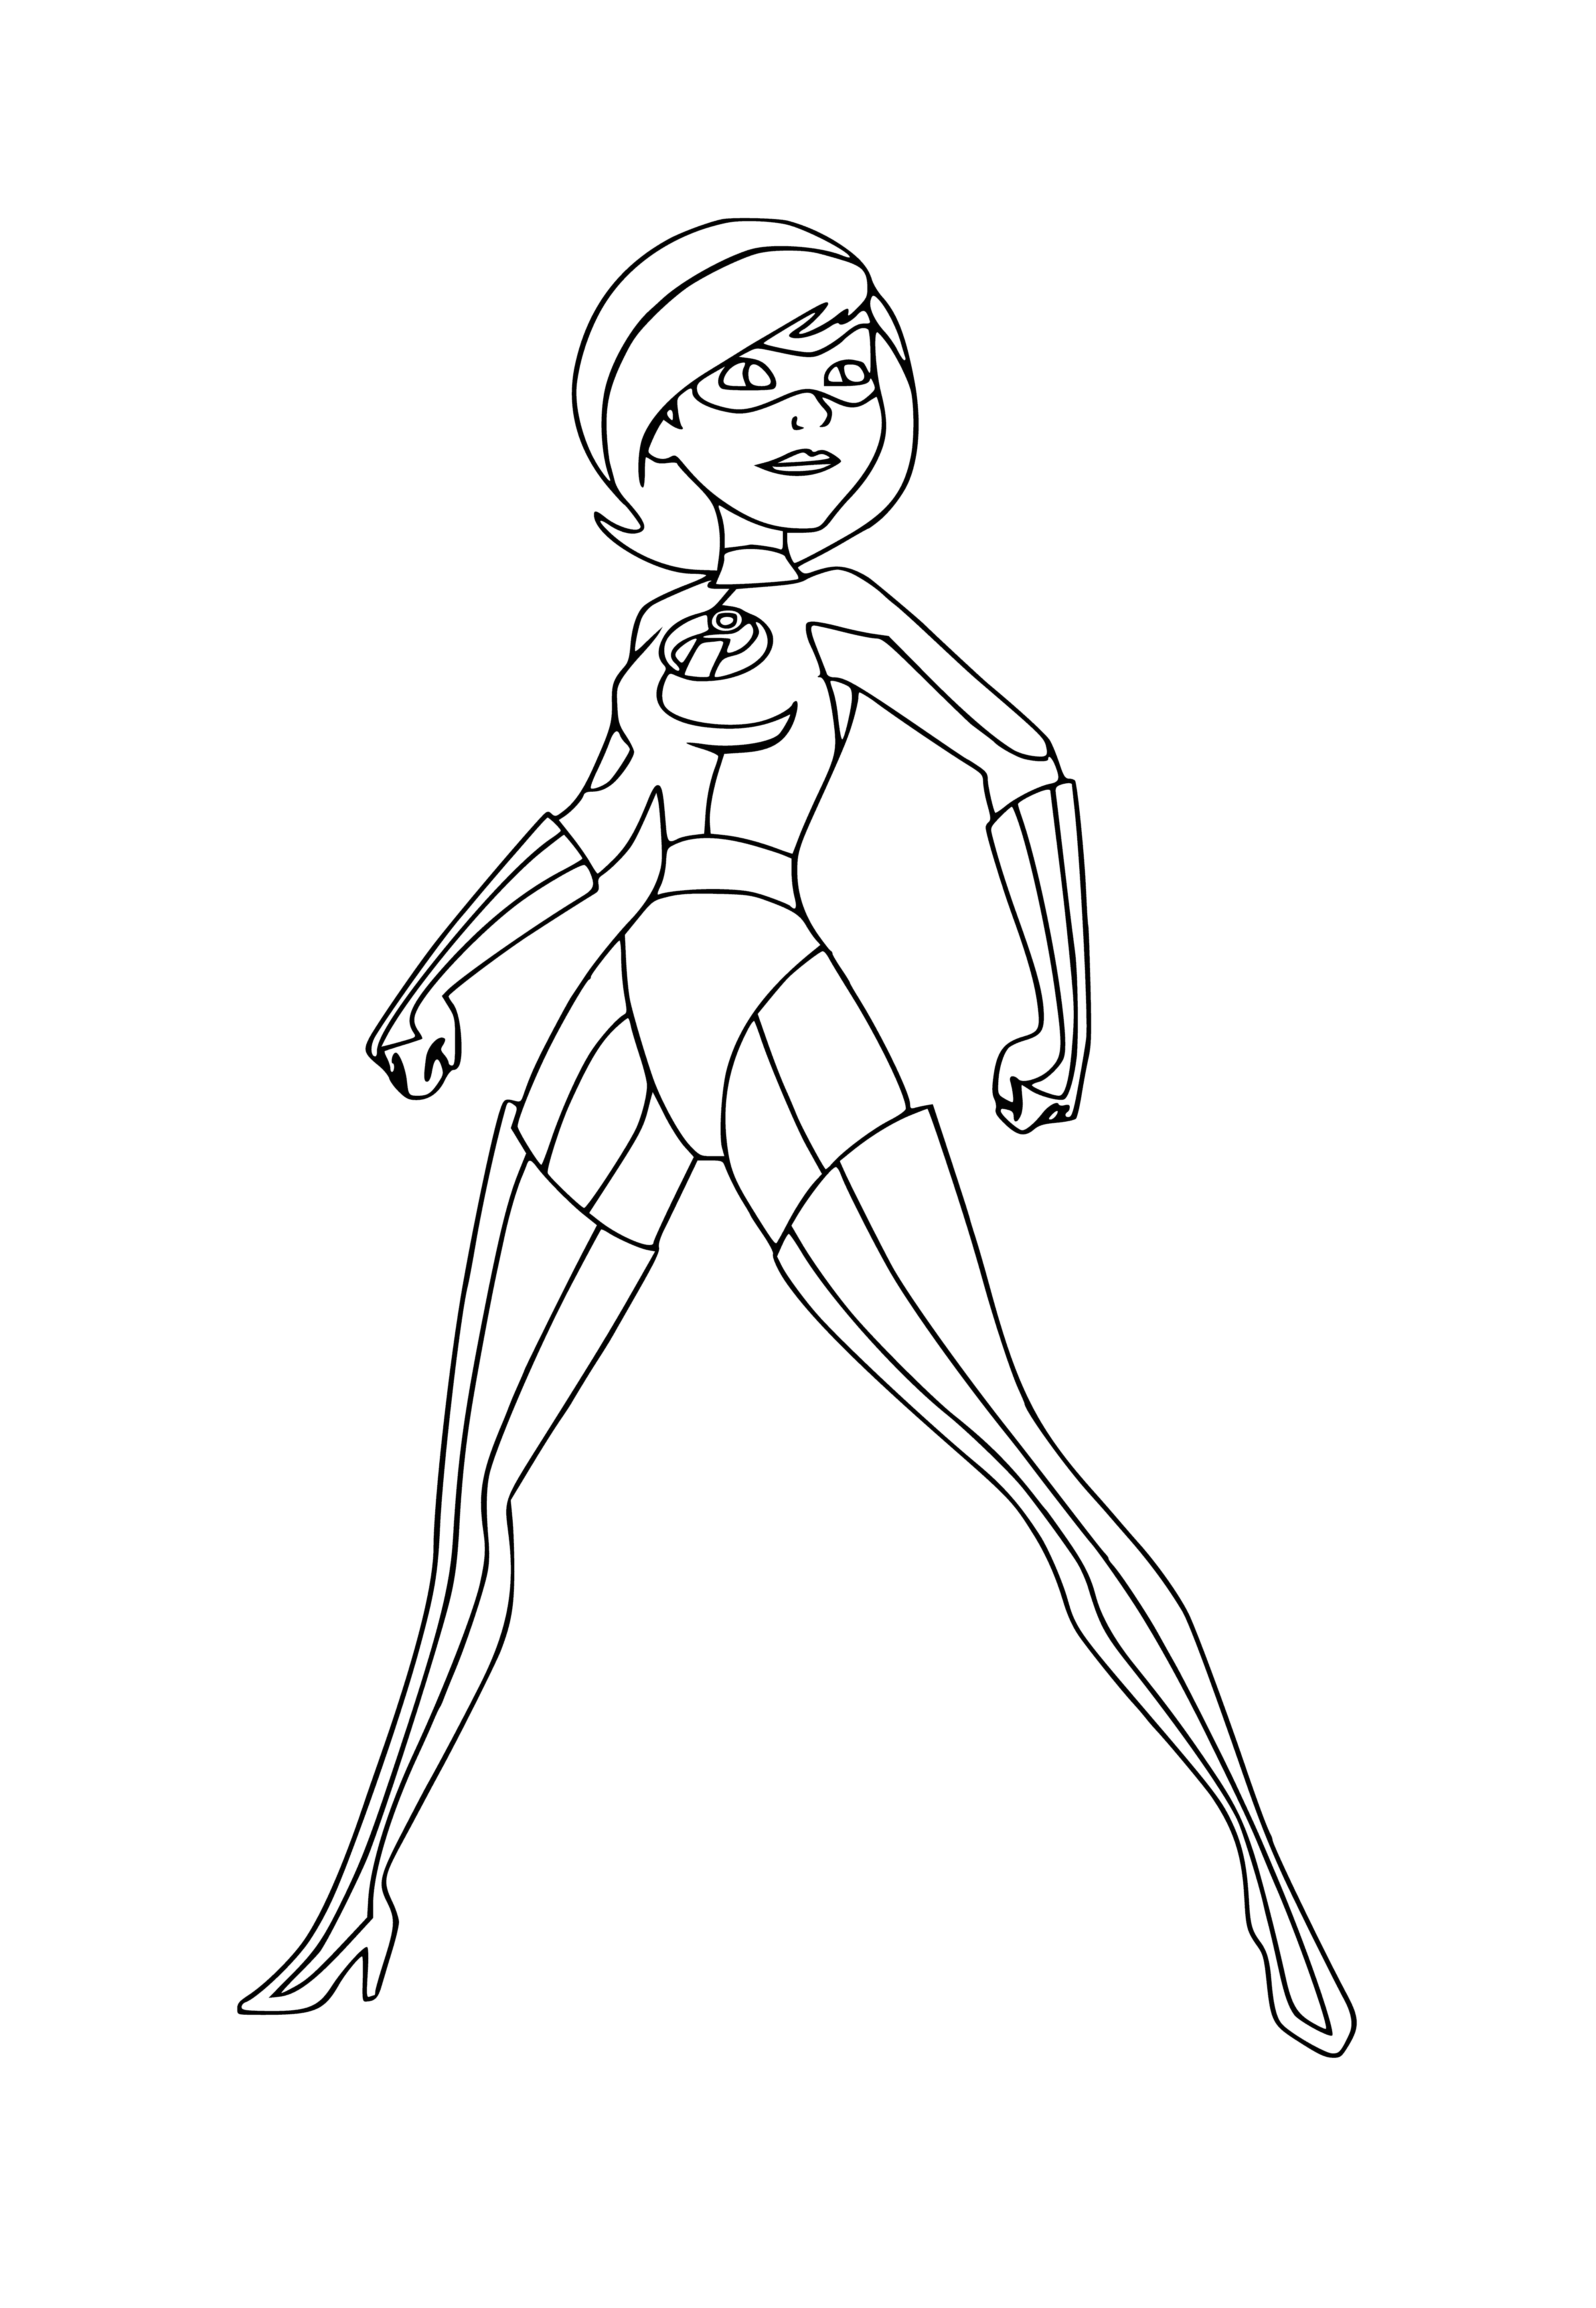 coloring page: The "Incredibles": a superhero family shown in a cartoon coloring page with a bright background and kids playing happily.